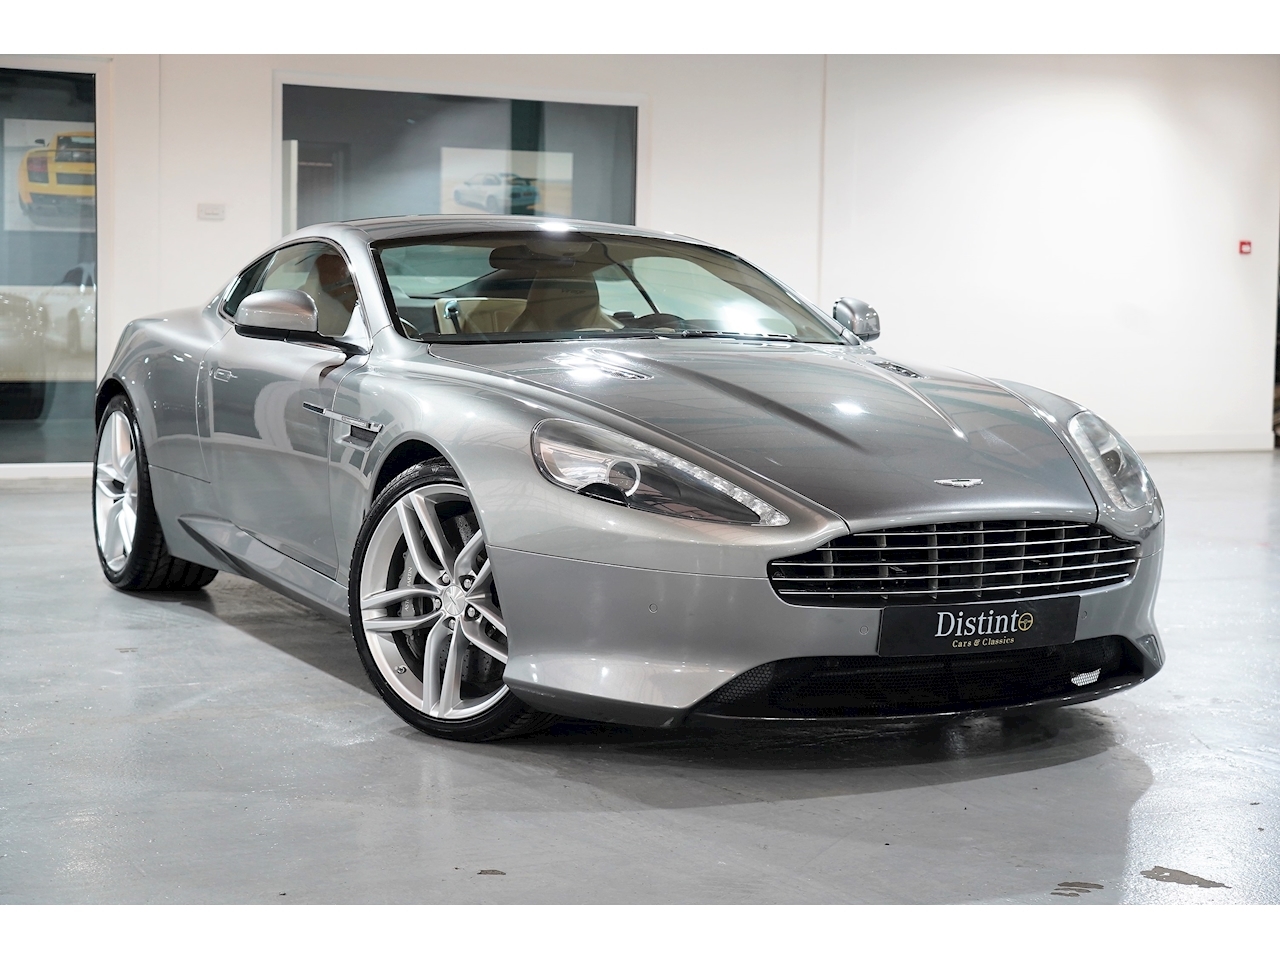 2012 Aston Martin Virage 6.0 V12 Coupe - Tungsten Silver - Left Hand Drive (LHD)